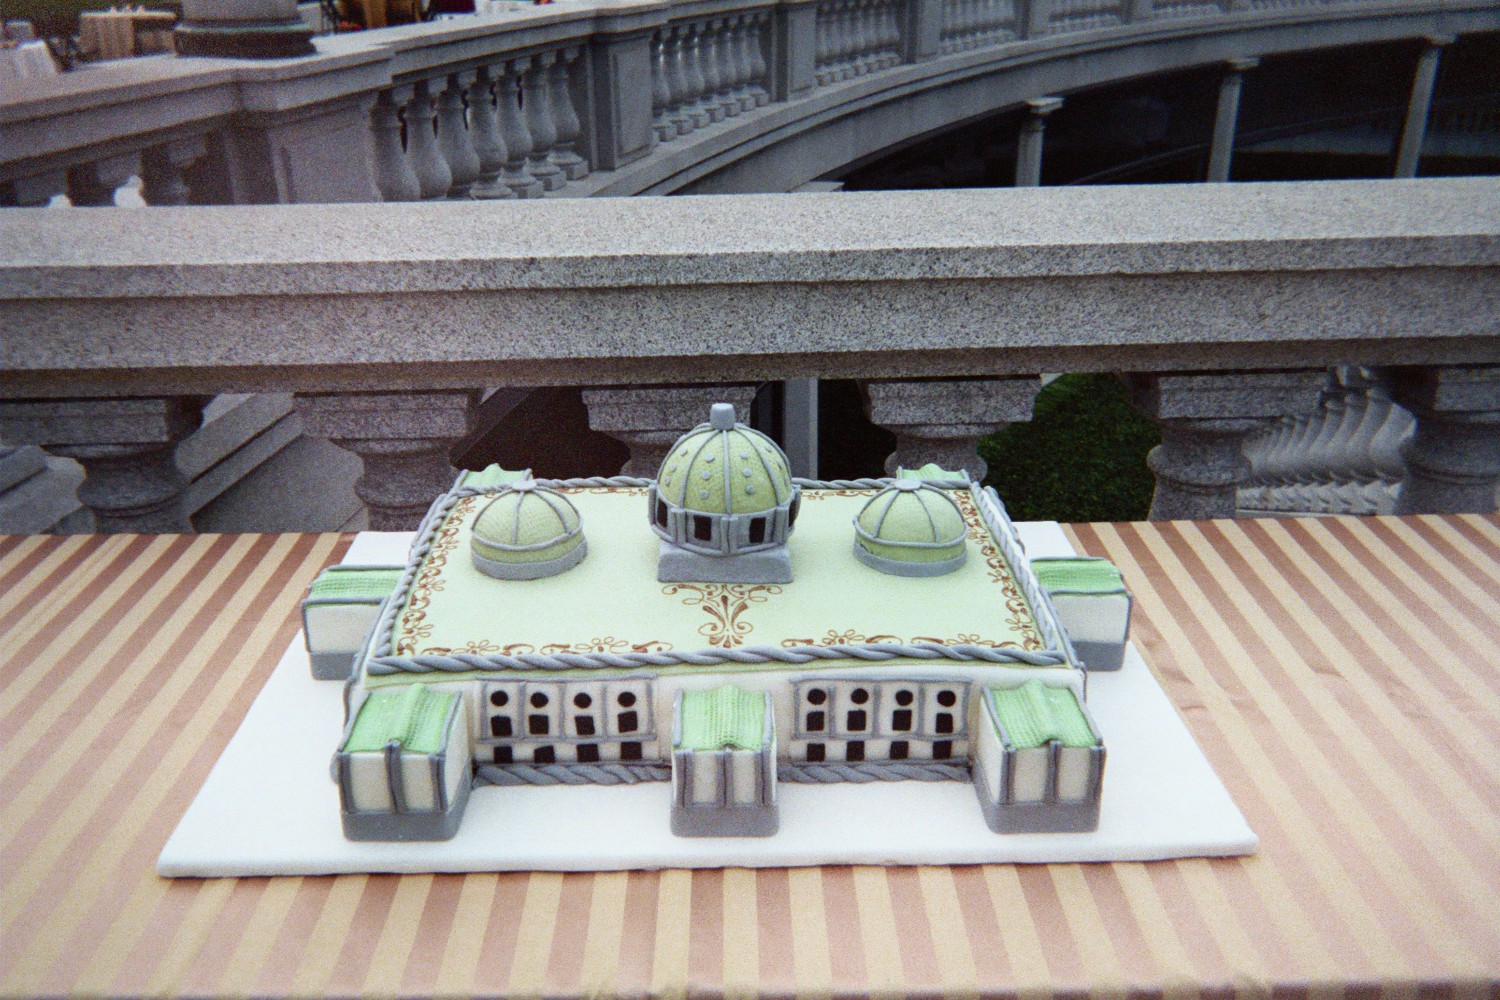 The Capitol 100th Anniversary Cake
